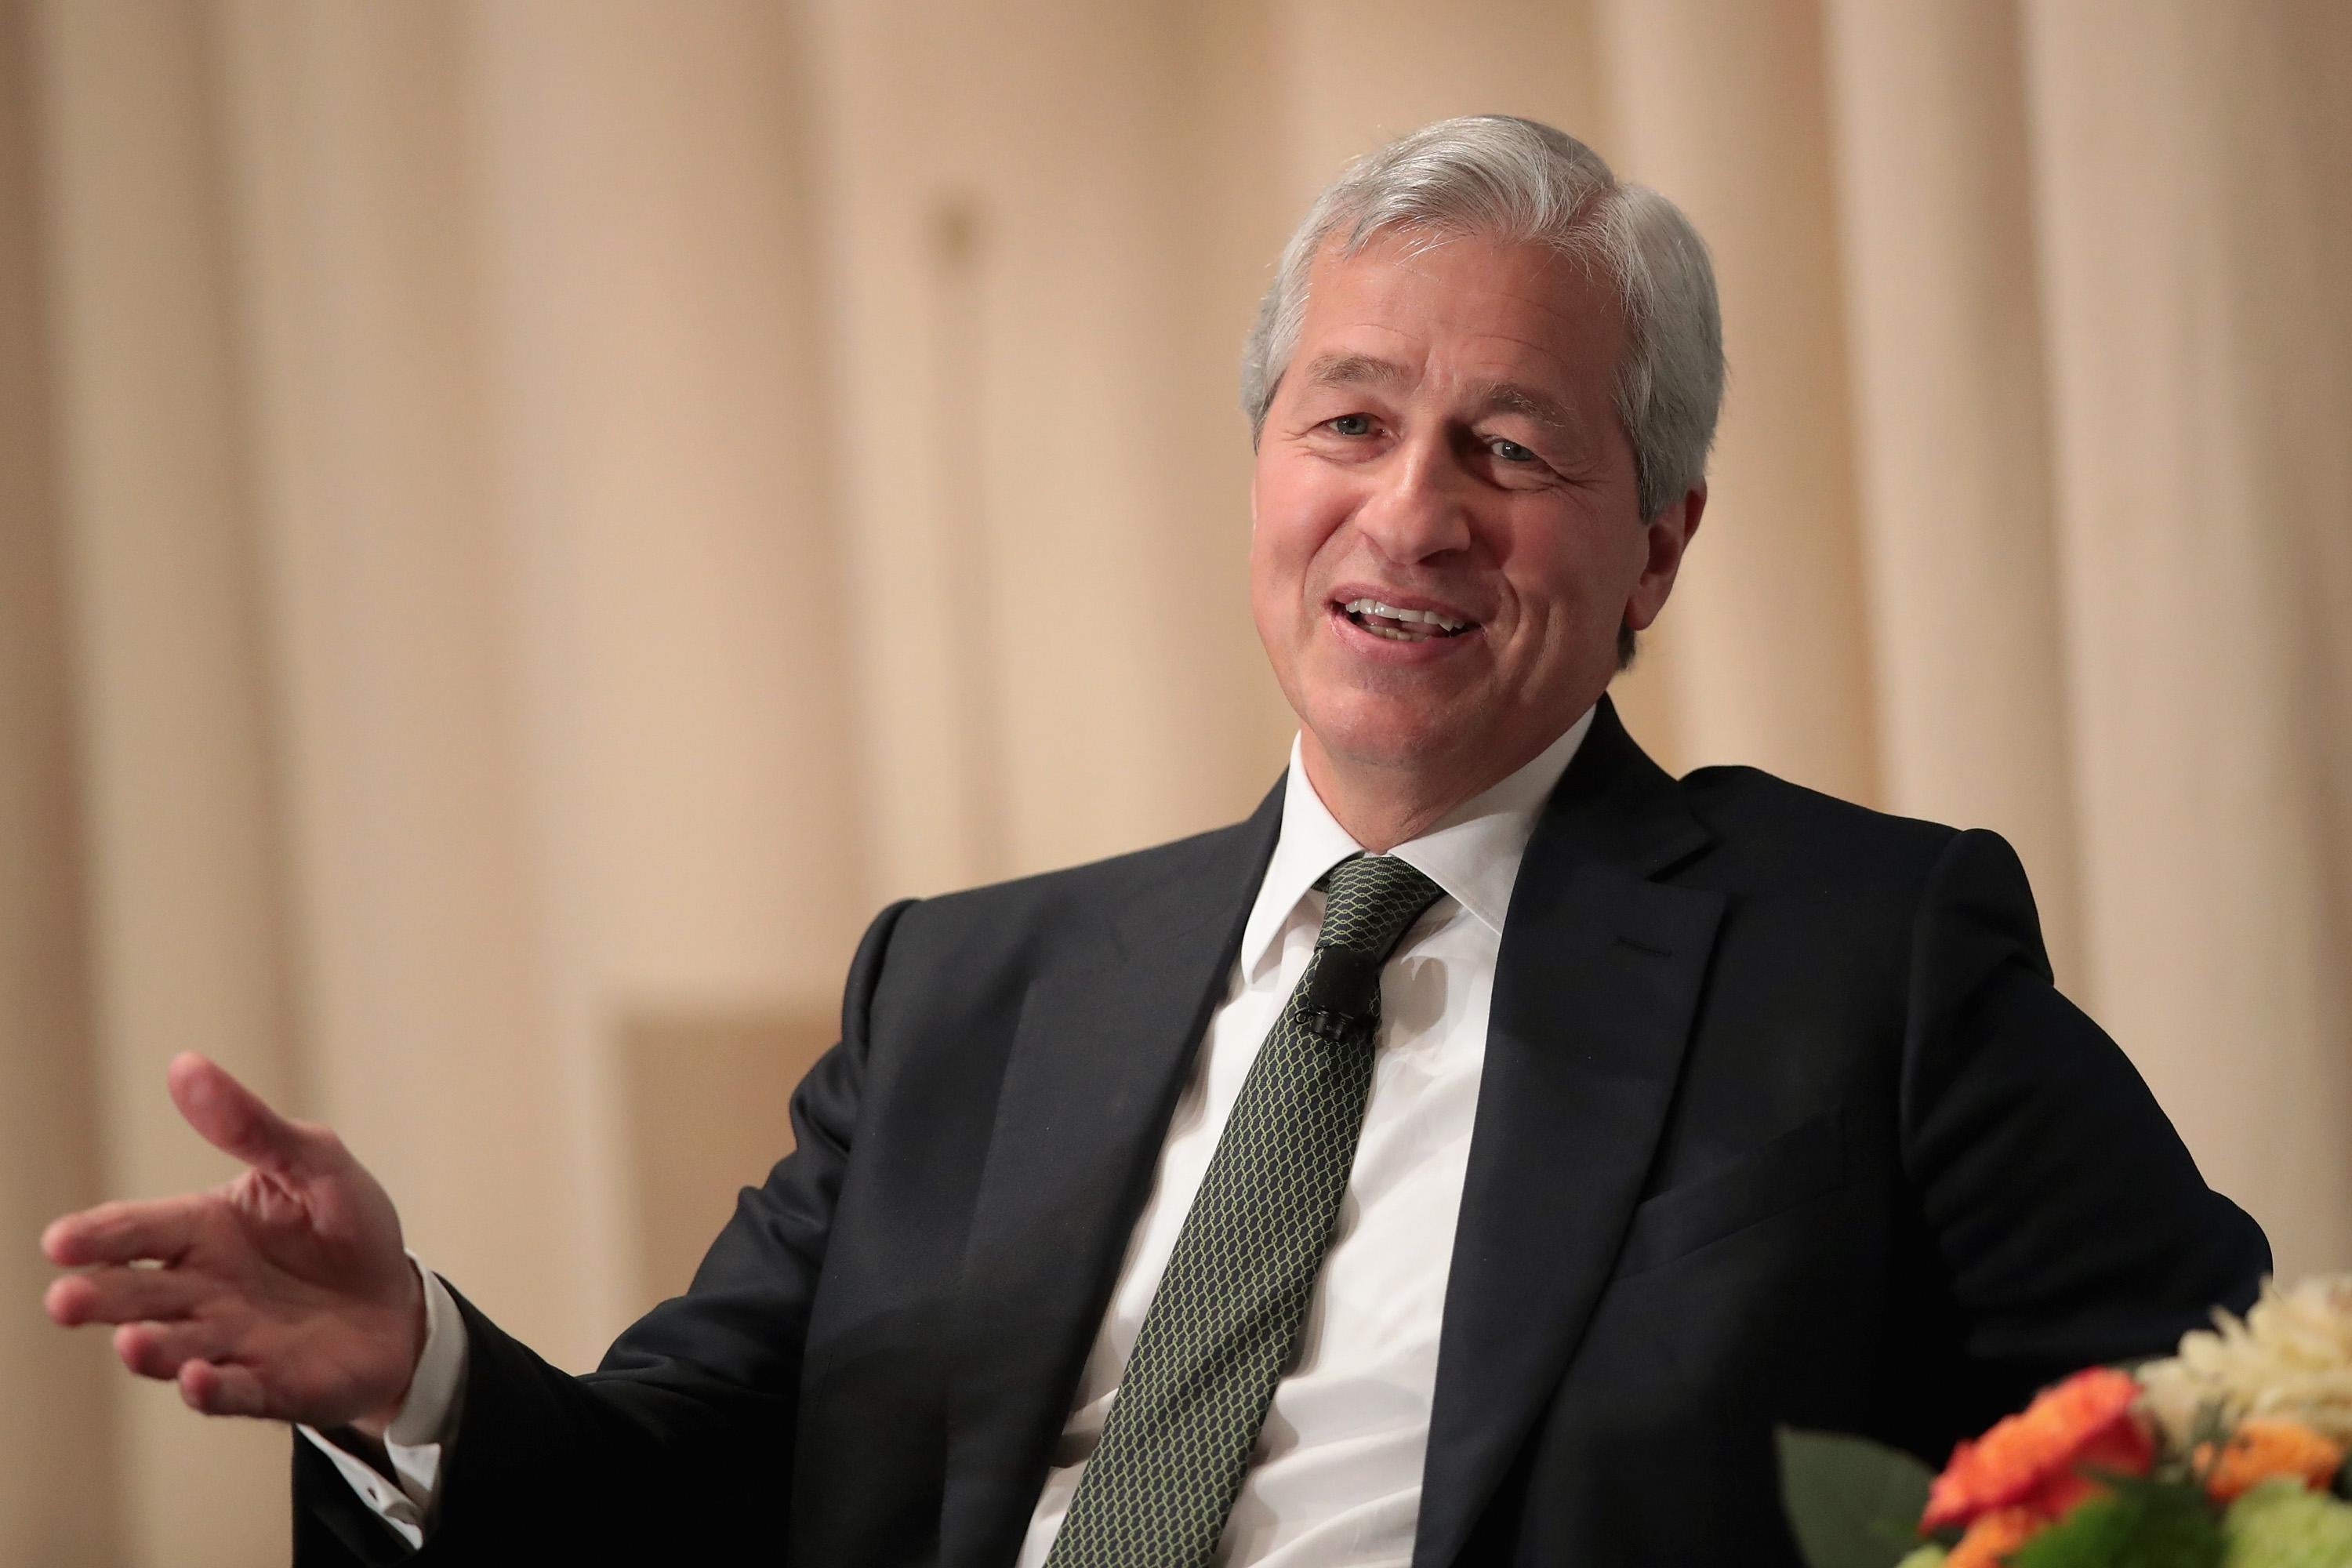 CHICAGO, IL - NOVEMBER 22:  Jamie Dimon, Chairman and CEO of JPMorgan Chase & Co, fields questions from Mellody Hobson, president of Ariel Investments, during a luncheon hosted by The Economic Club of Chicago on November 22, 2017 in Chicago, Illinois.  Dimon has been in charge of JPMorgan Chase since 2005.  (Photo by Scott Olson/Getty Images)